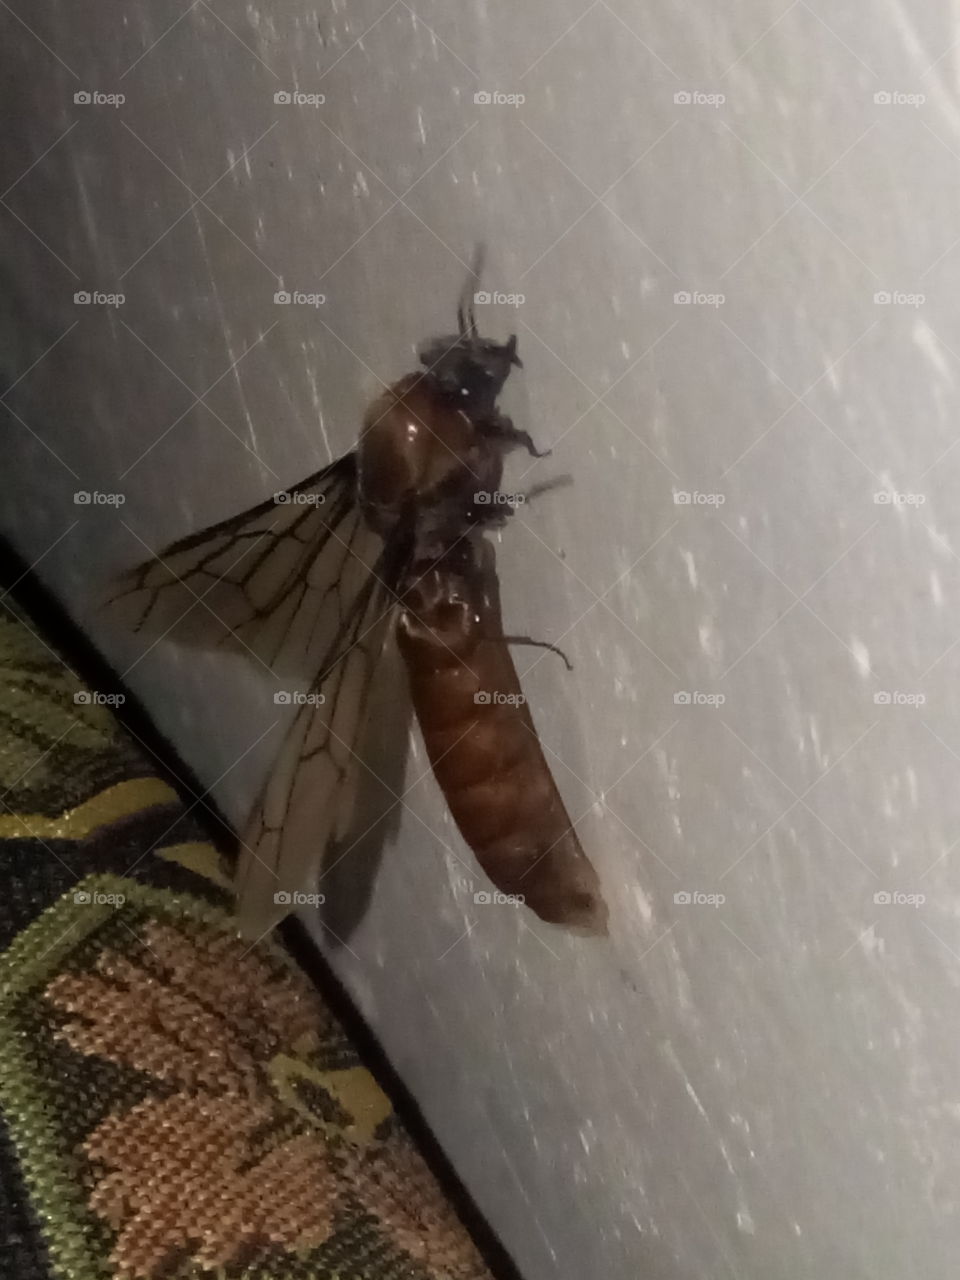 A strange insect